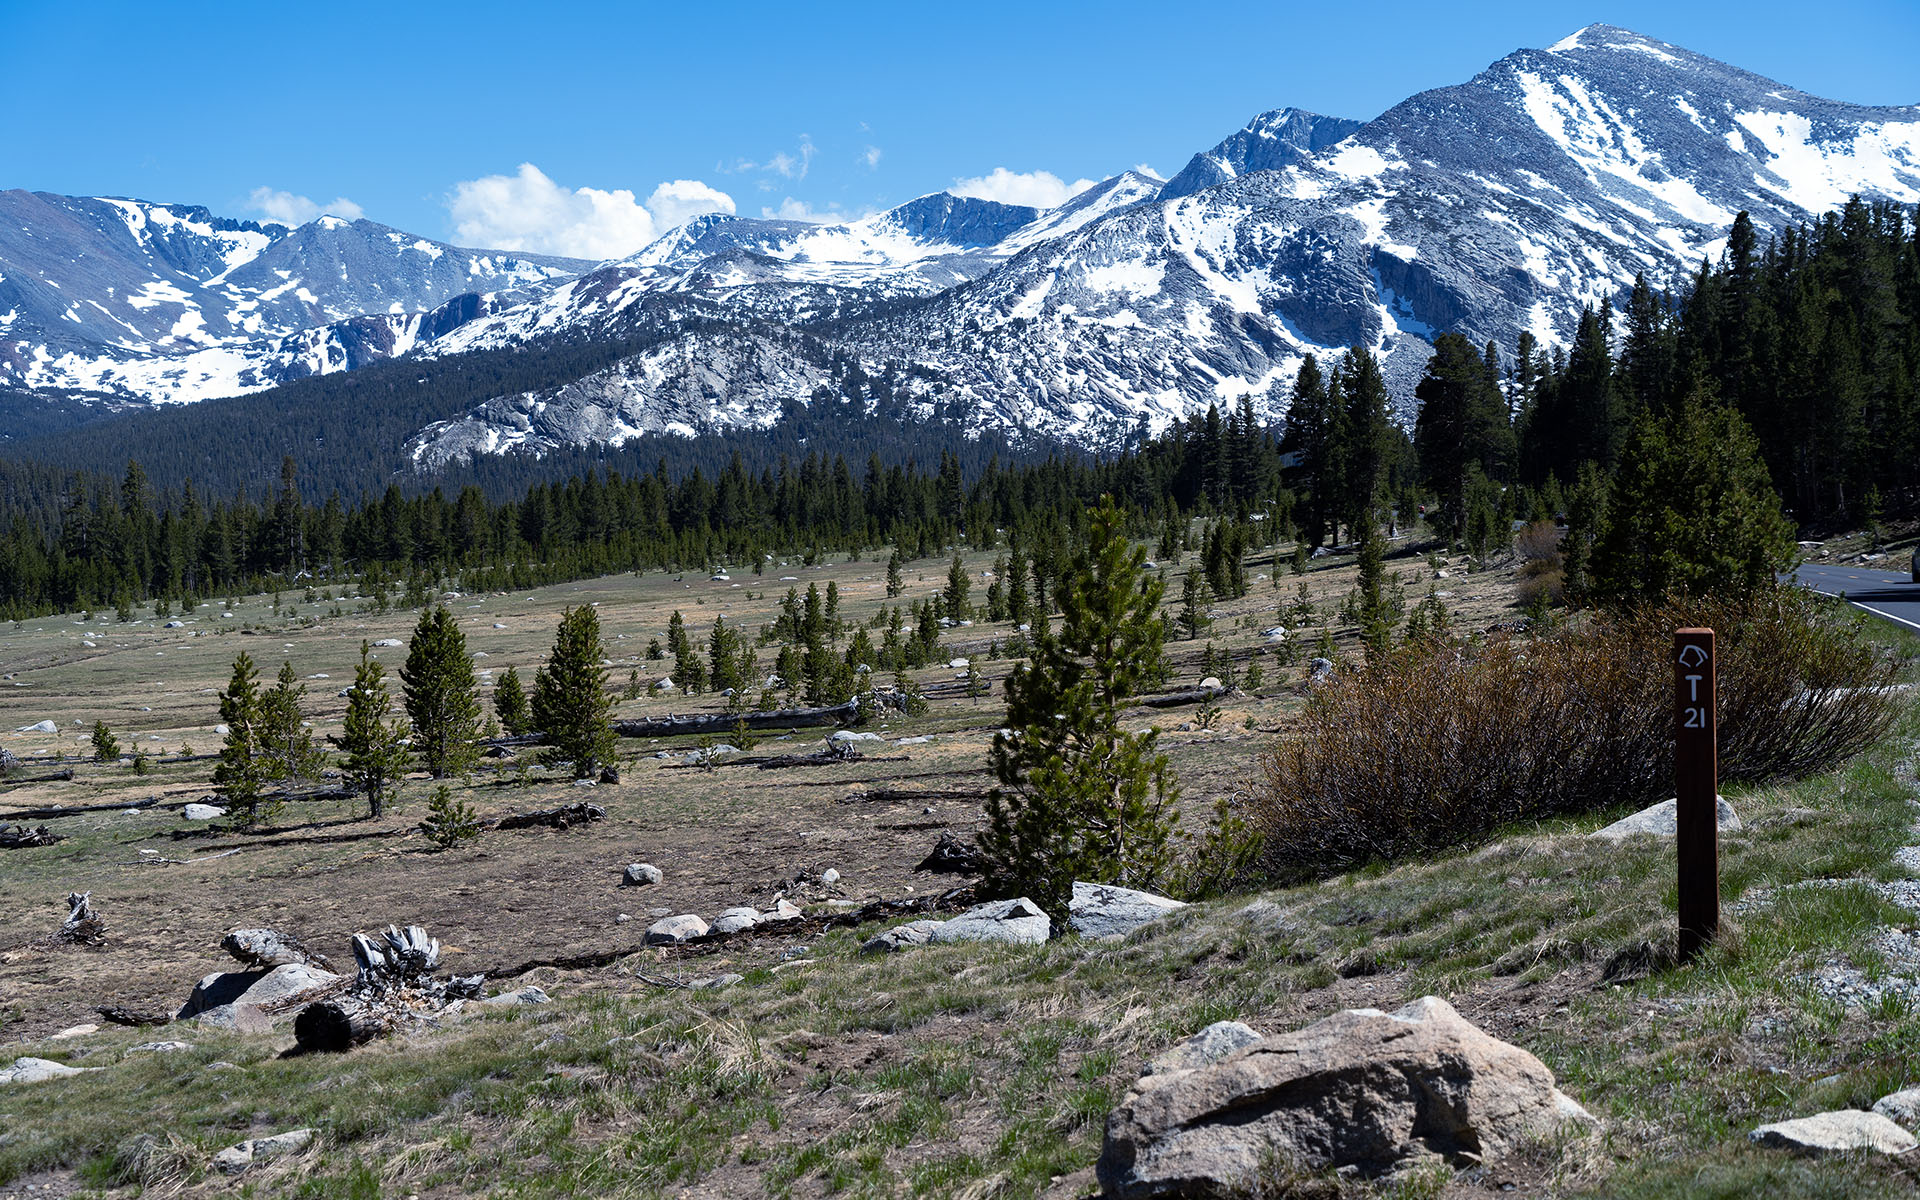 The Kuna Crest, in the Eastern Sierra, from Highway 120/Tioga Pass